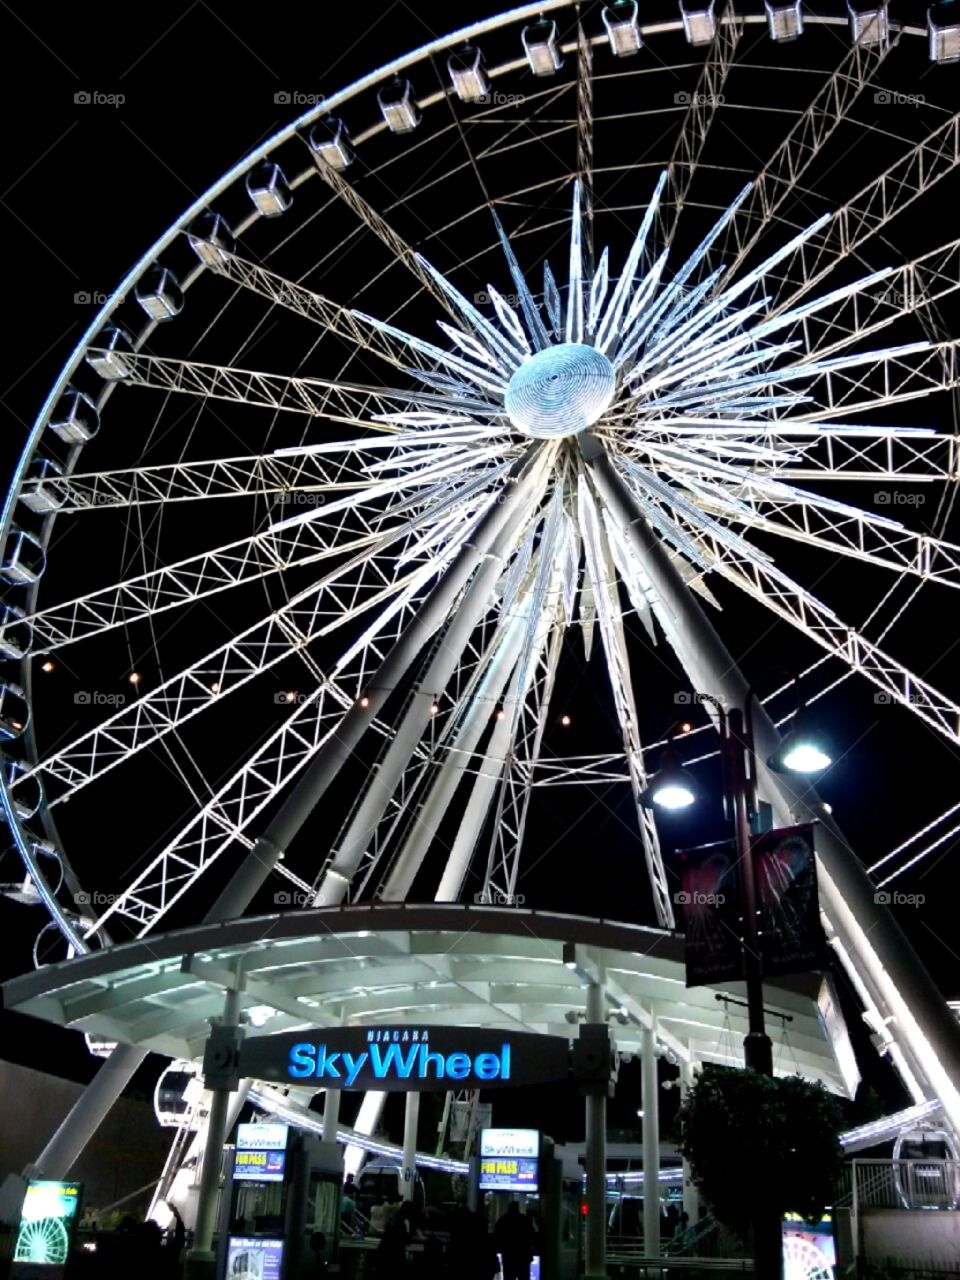 Niagara Falls Sky Wheel. The famous Sky Wheel of Niagara falls (Canadian side). One of the largest in the world!